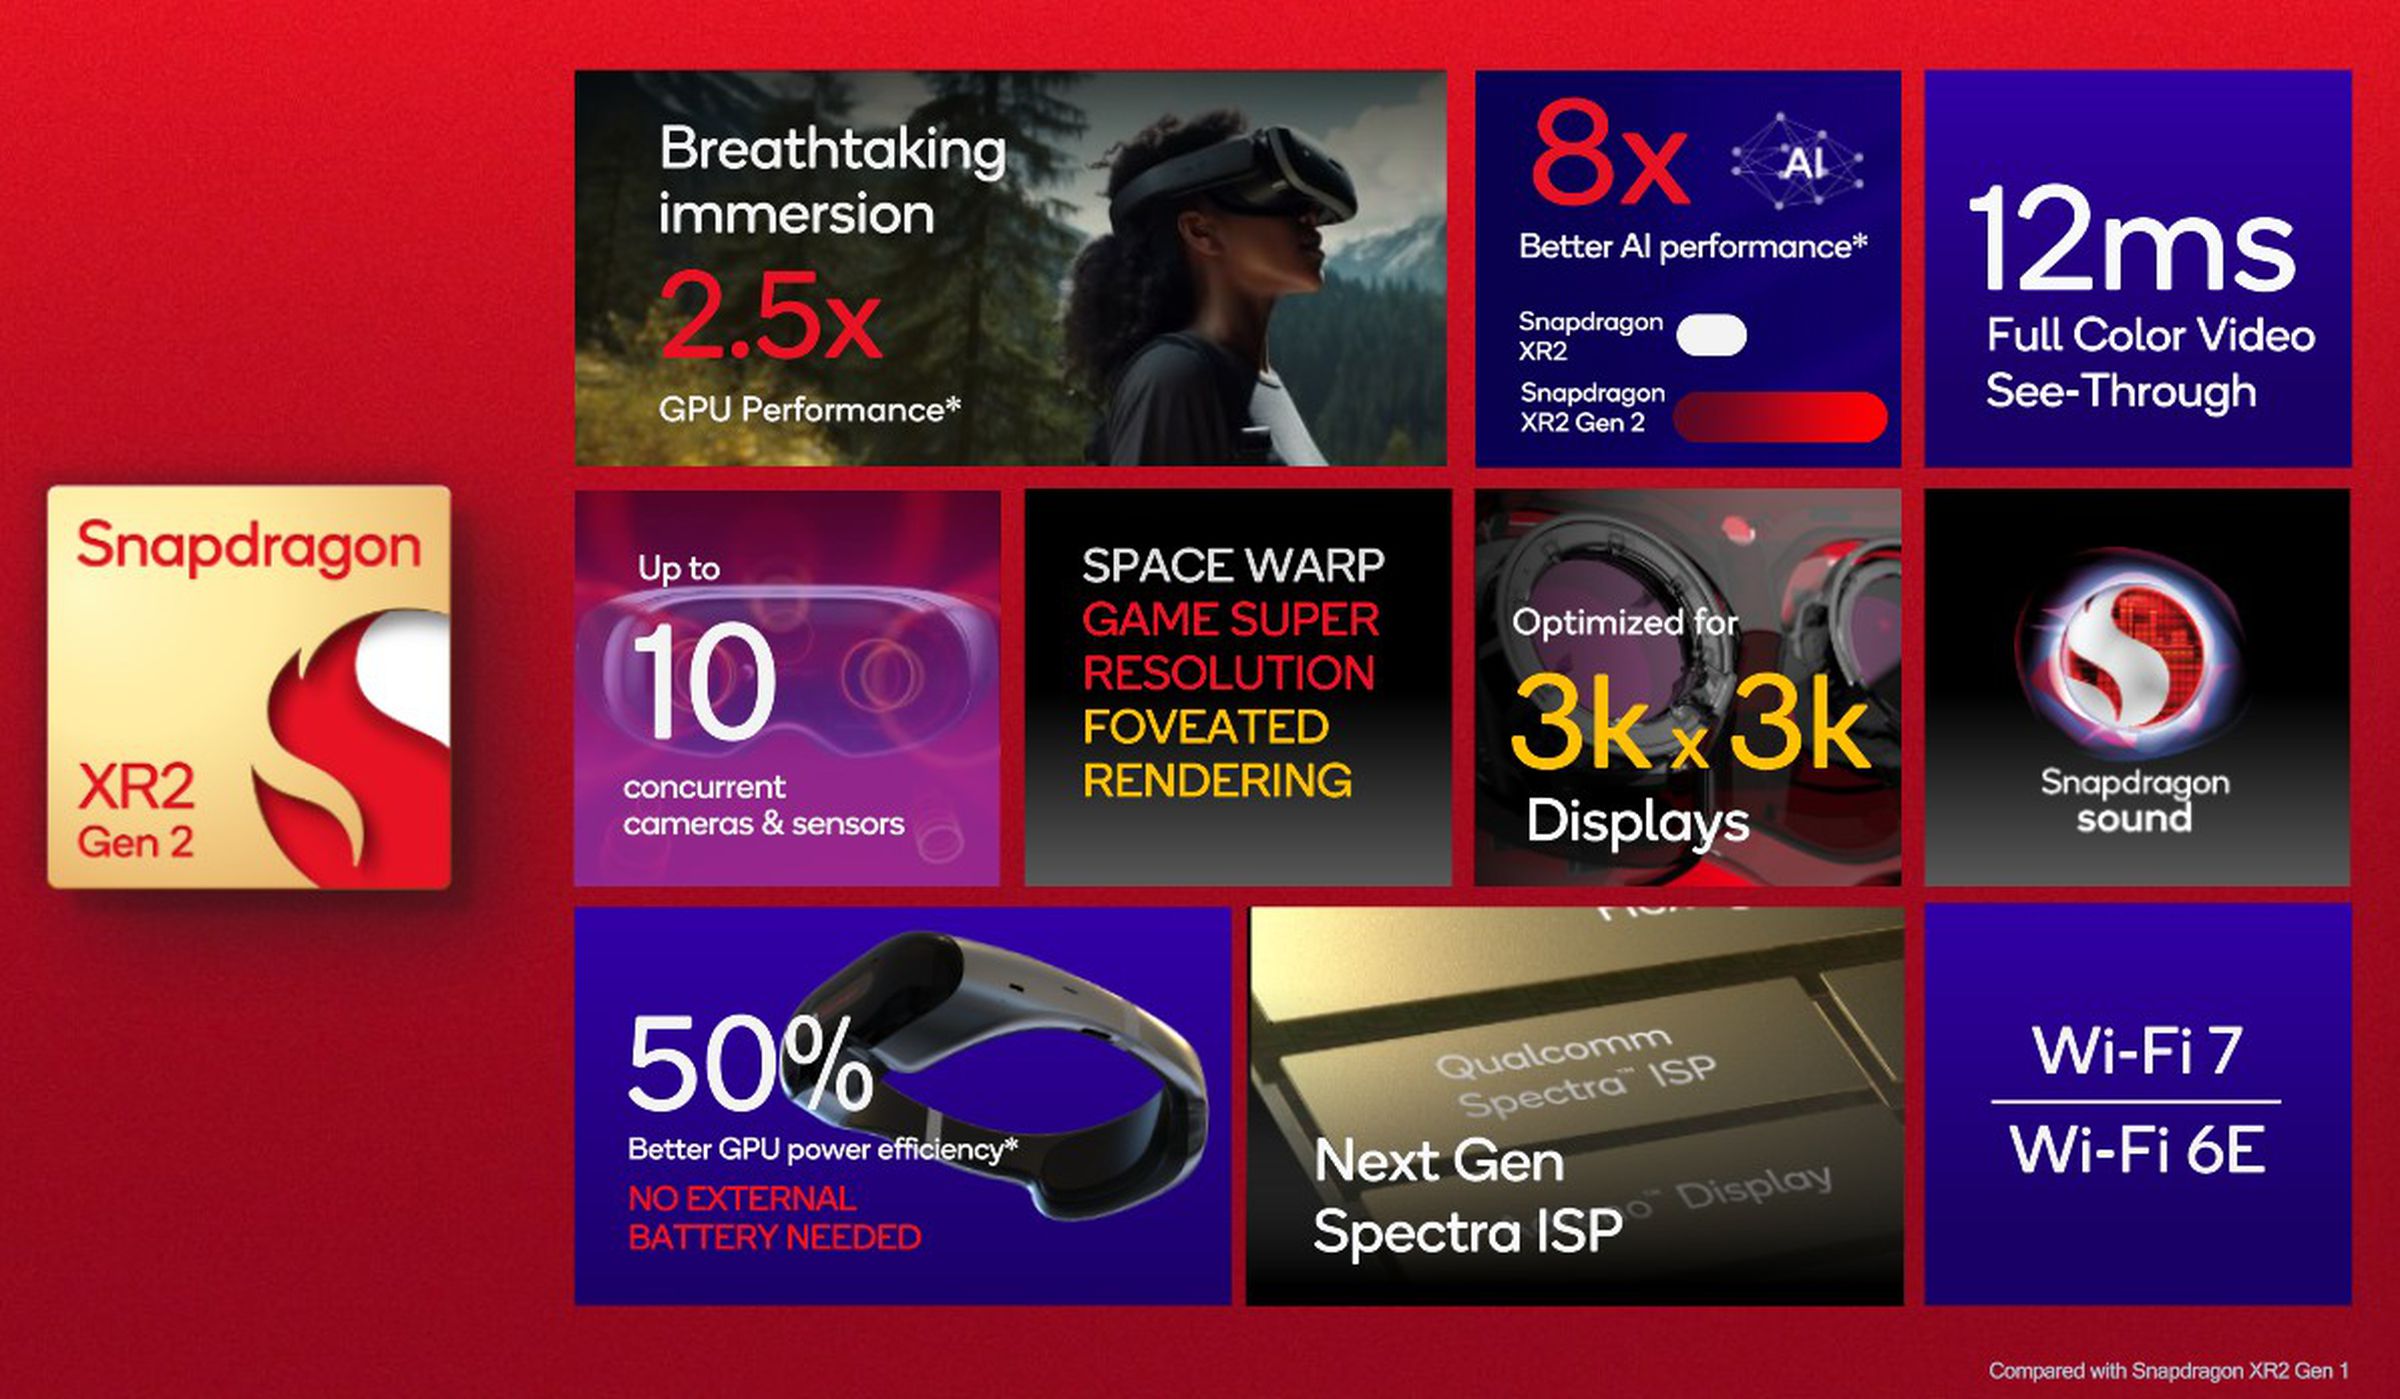 The Snapdragon XR2 Gen 2’s main features.